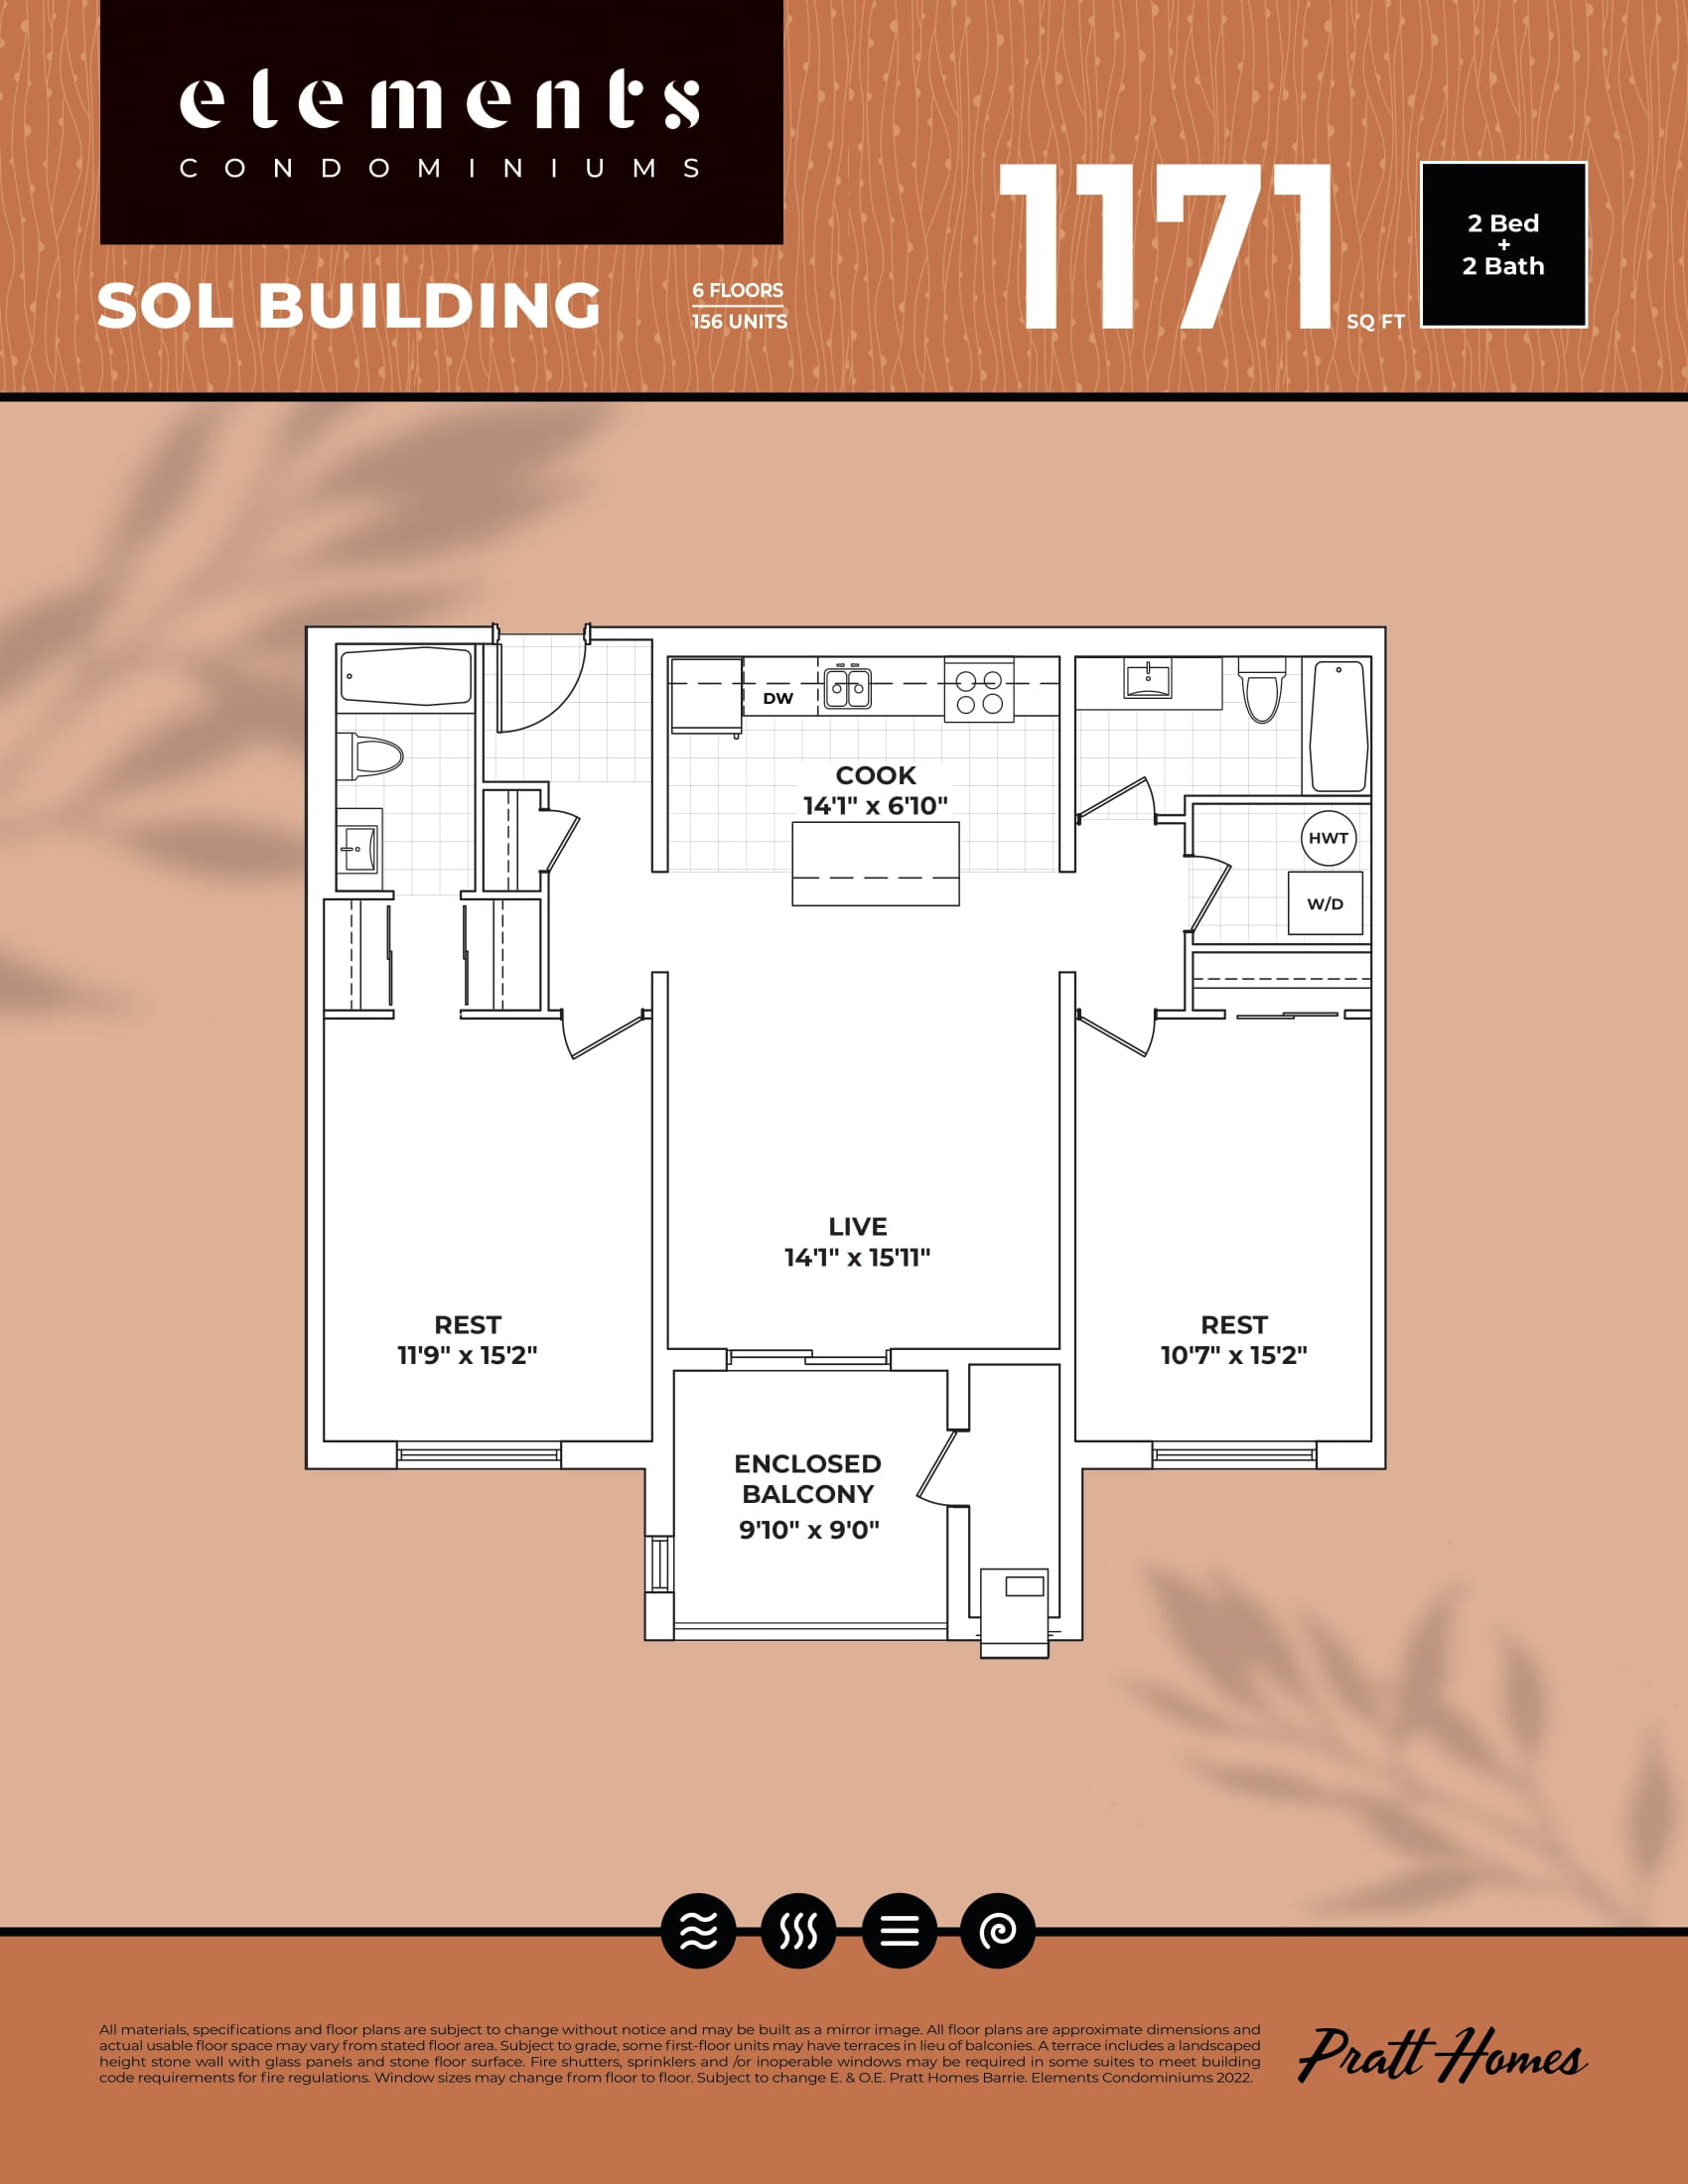  Floor Plan of Elements Condominiums with undefined beds